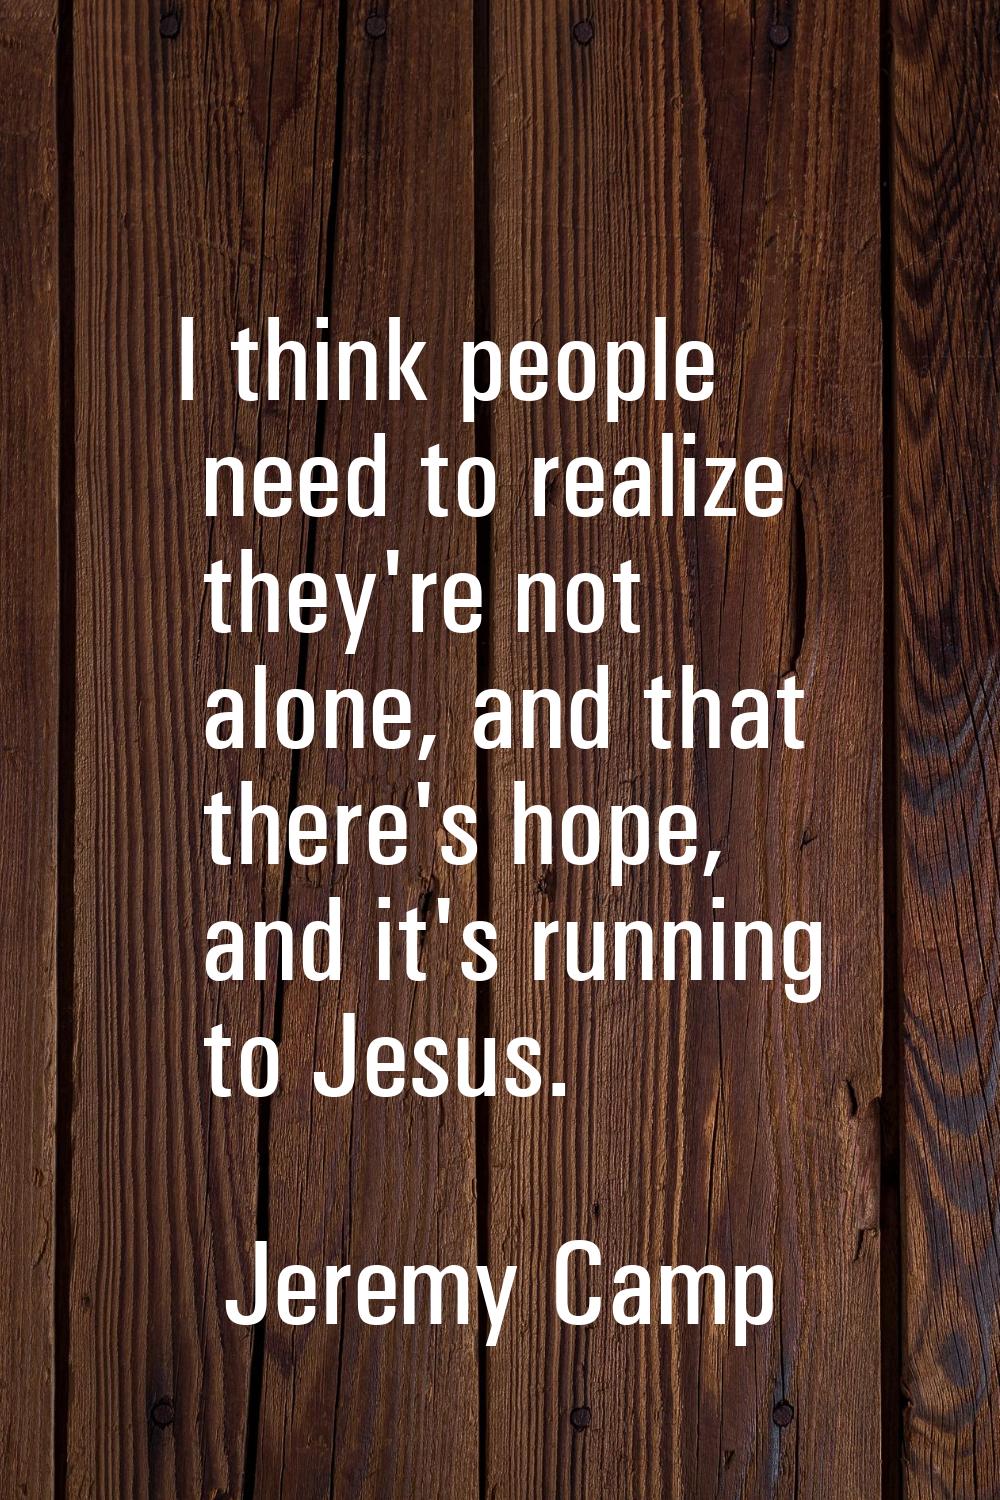 I think people need to realize they're not alone, and that there's hope, and it's running to Jesus.